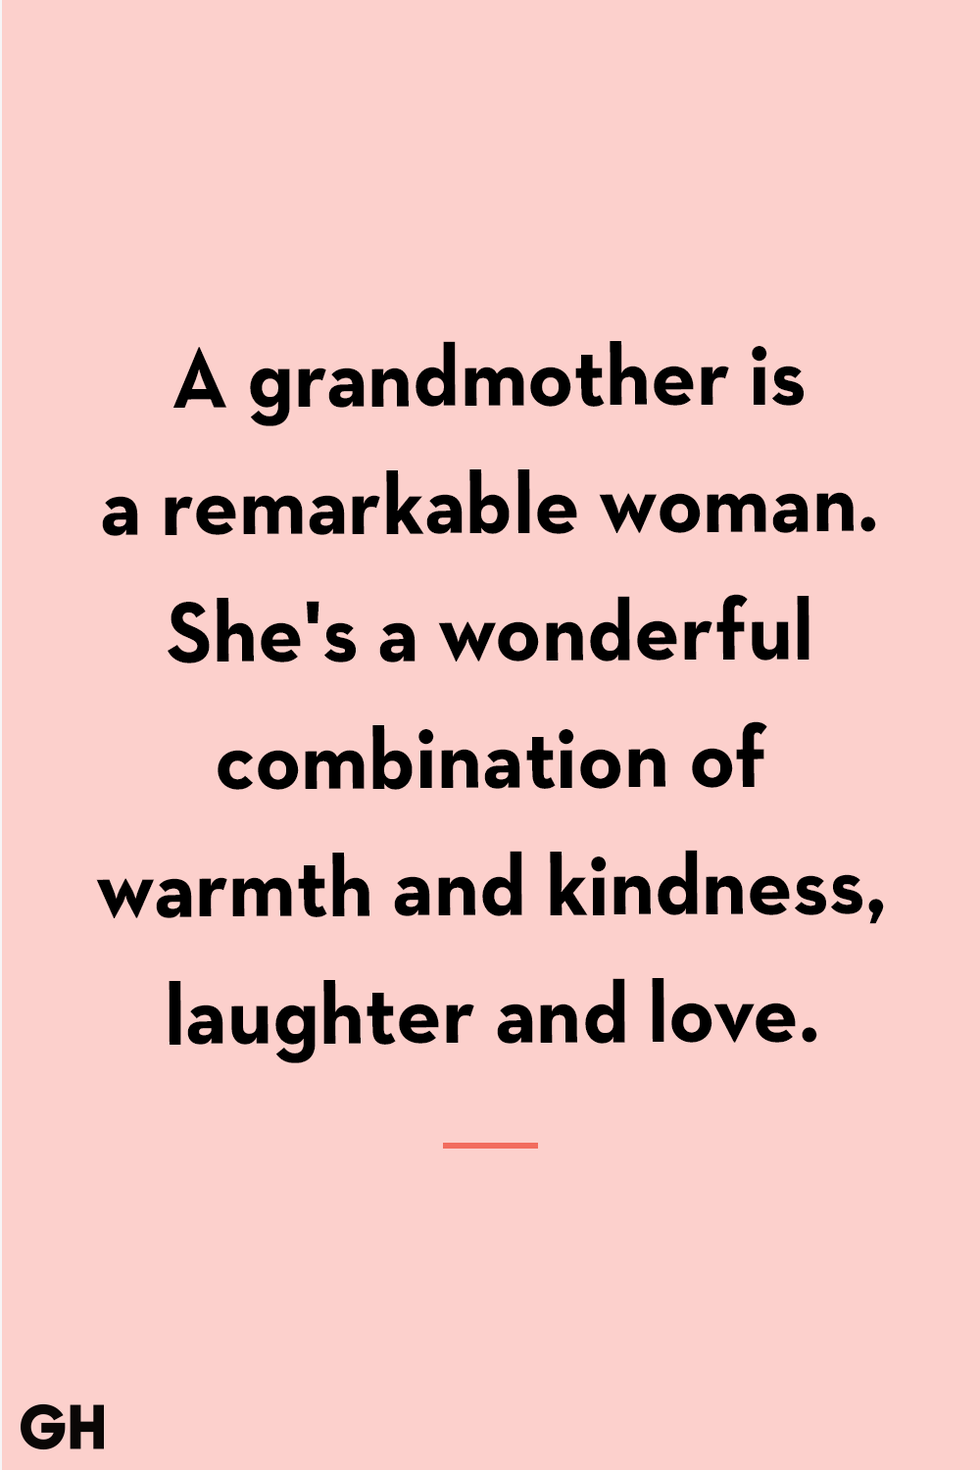 Love simply - Lessons from my grandmother